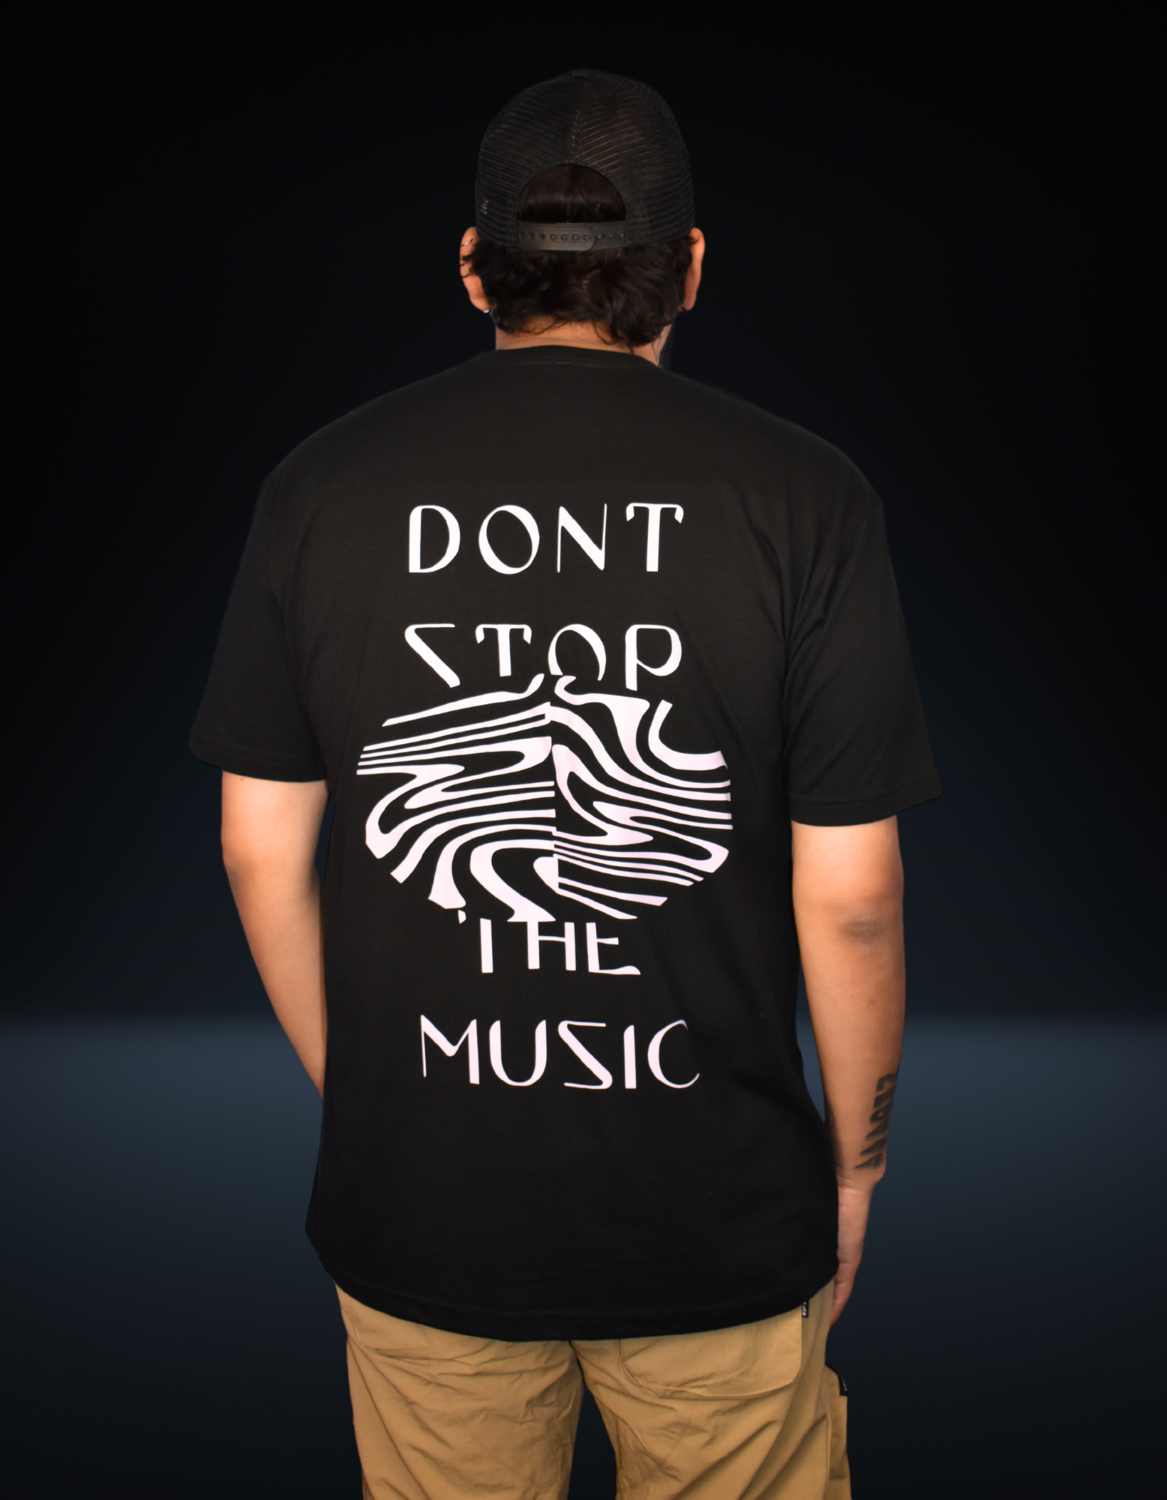 DONT STOP THE MUSIC, Size: medium